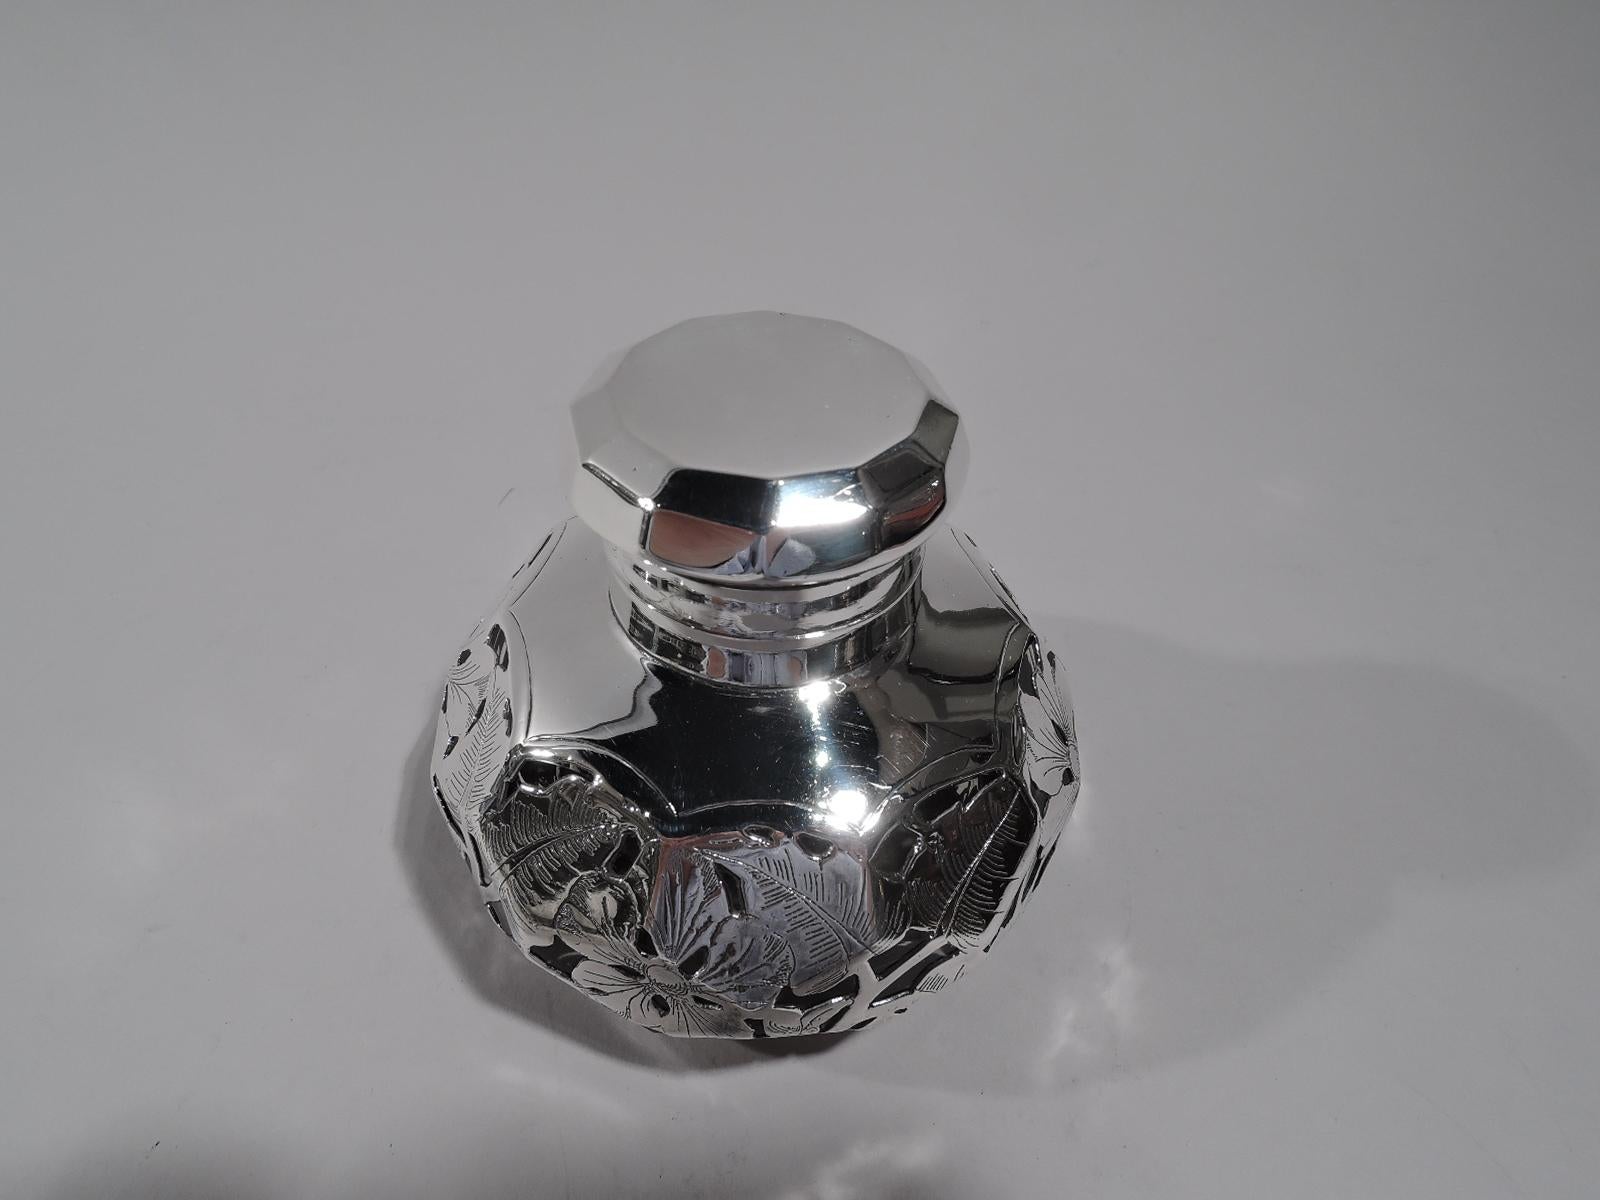 American Art Nouveau inkwell with engraved silver overlay, circa 1886. Bellied and faceted, short neck in silver collar and hinged and faceted silver cover. Overlay in form of dense and connected leafing and flowering branches. Glass is clear.